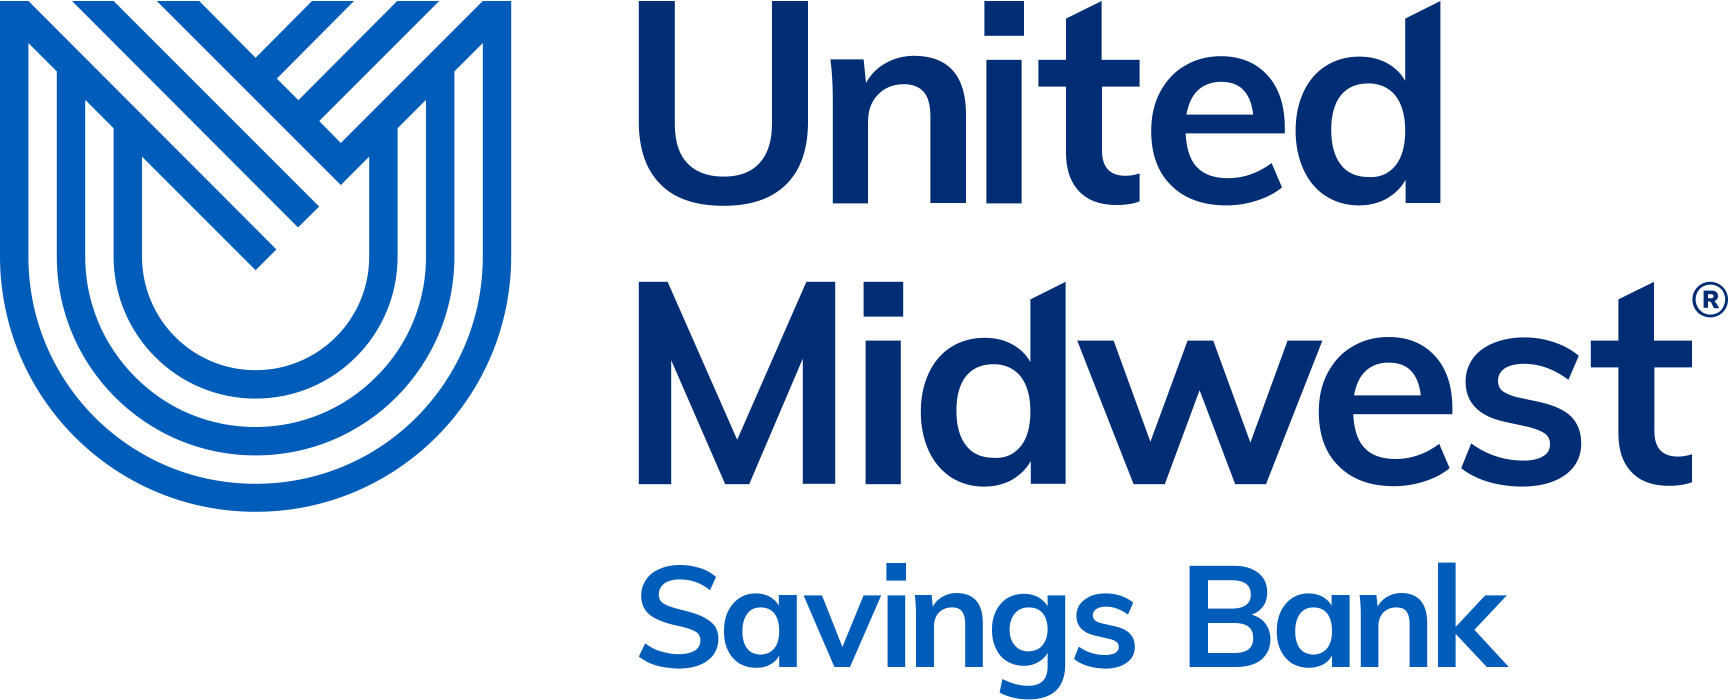 United midwest